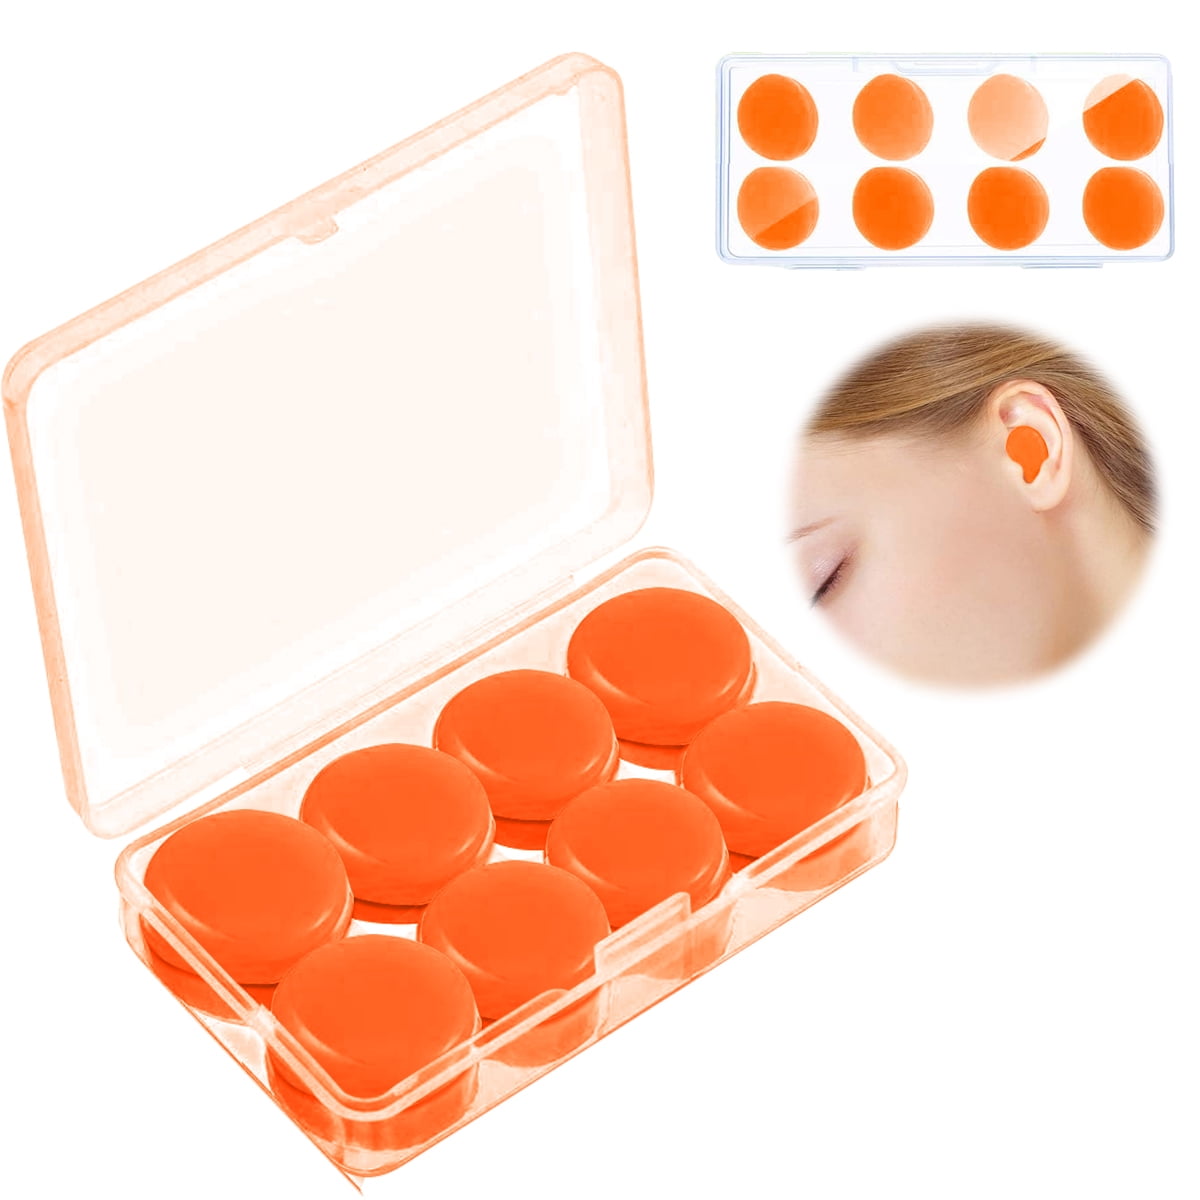 Reusable Silicone Ear Plugs, Waterproof Noise Cancelling EarPlugs for  Sleeping, Mowing, Swimming, Airplanes, Concerts